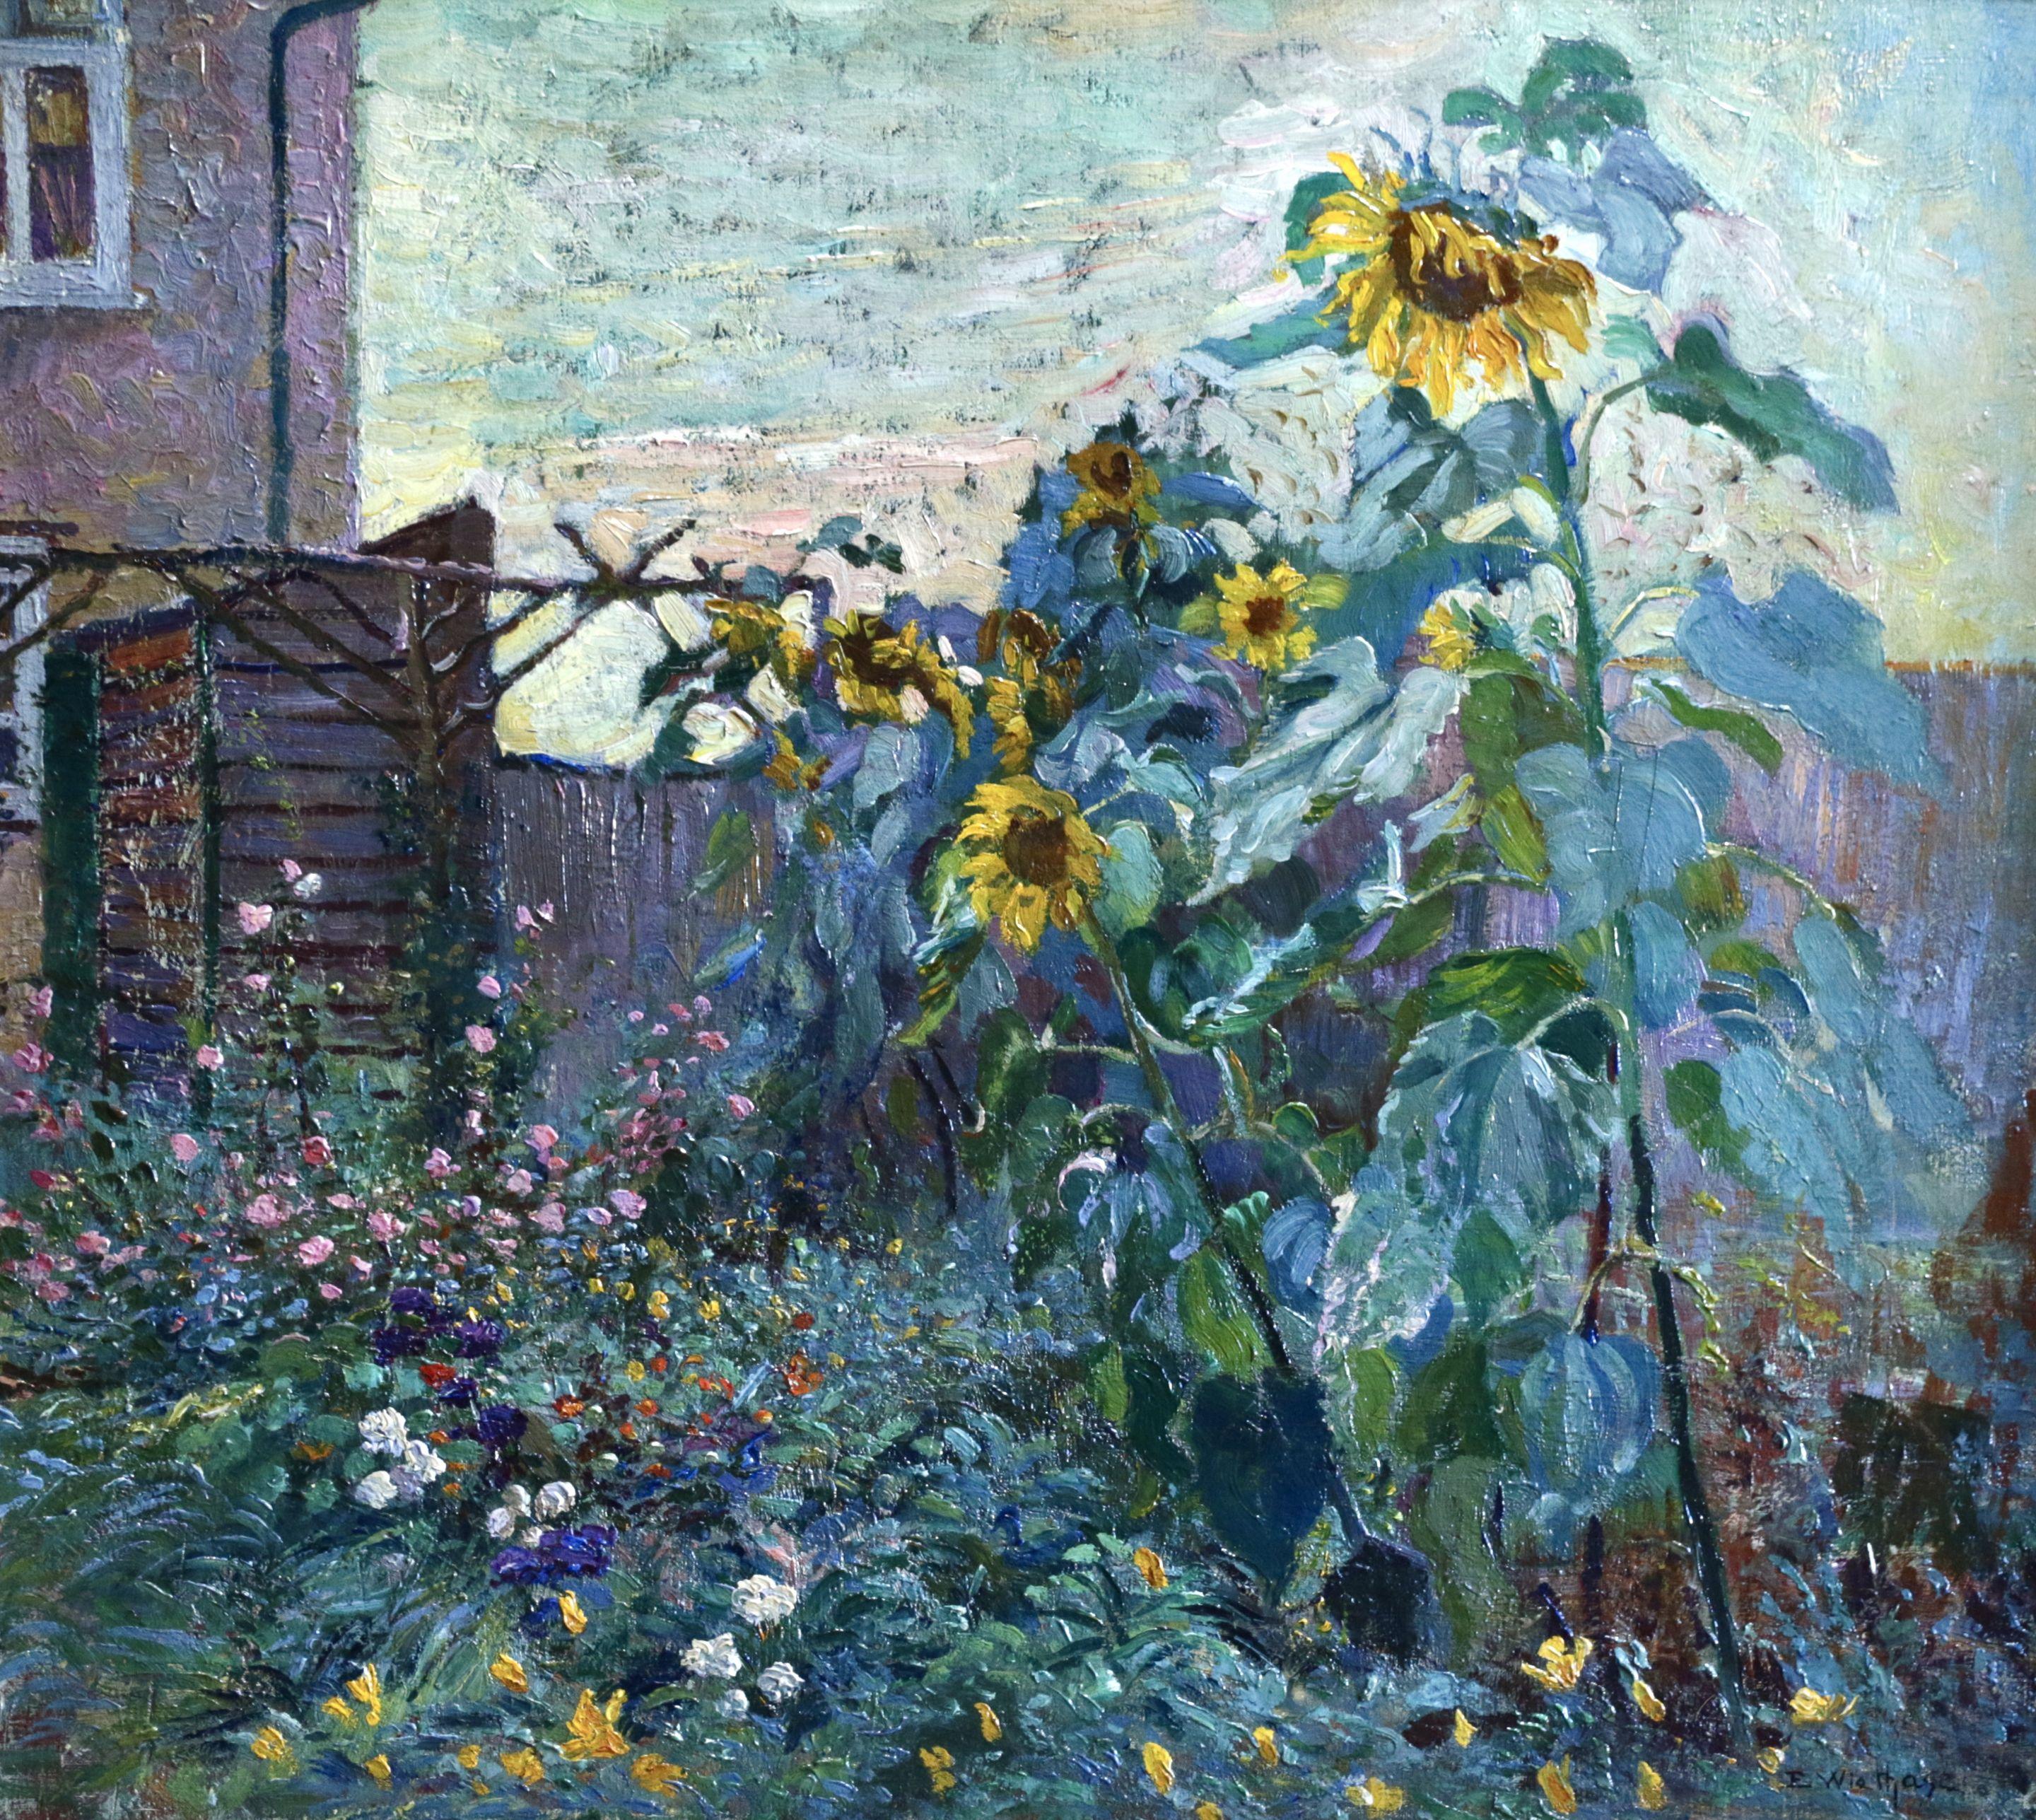 Edgard Wiethase Landscape Painting - Sunflowers, Early 20th Century Belgian Post-Impressionist Flowers Landscape